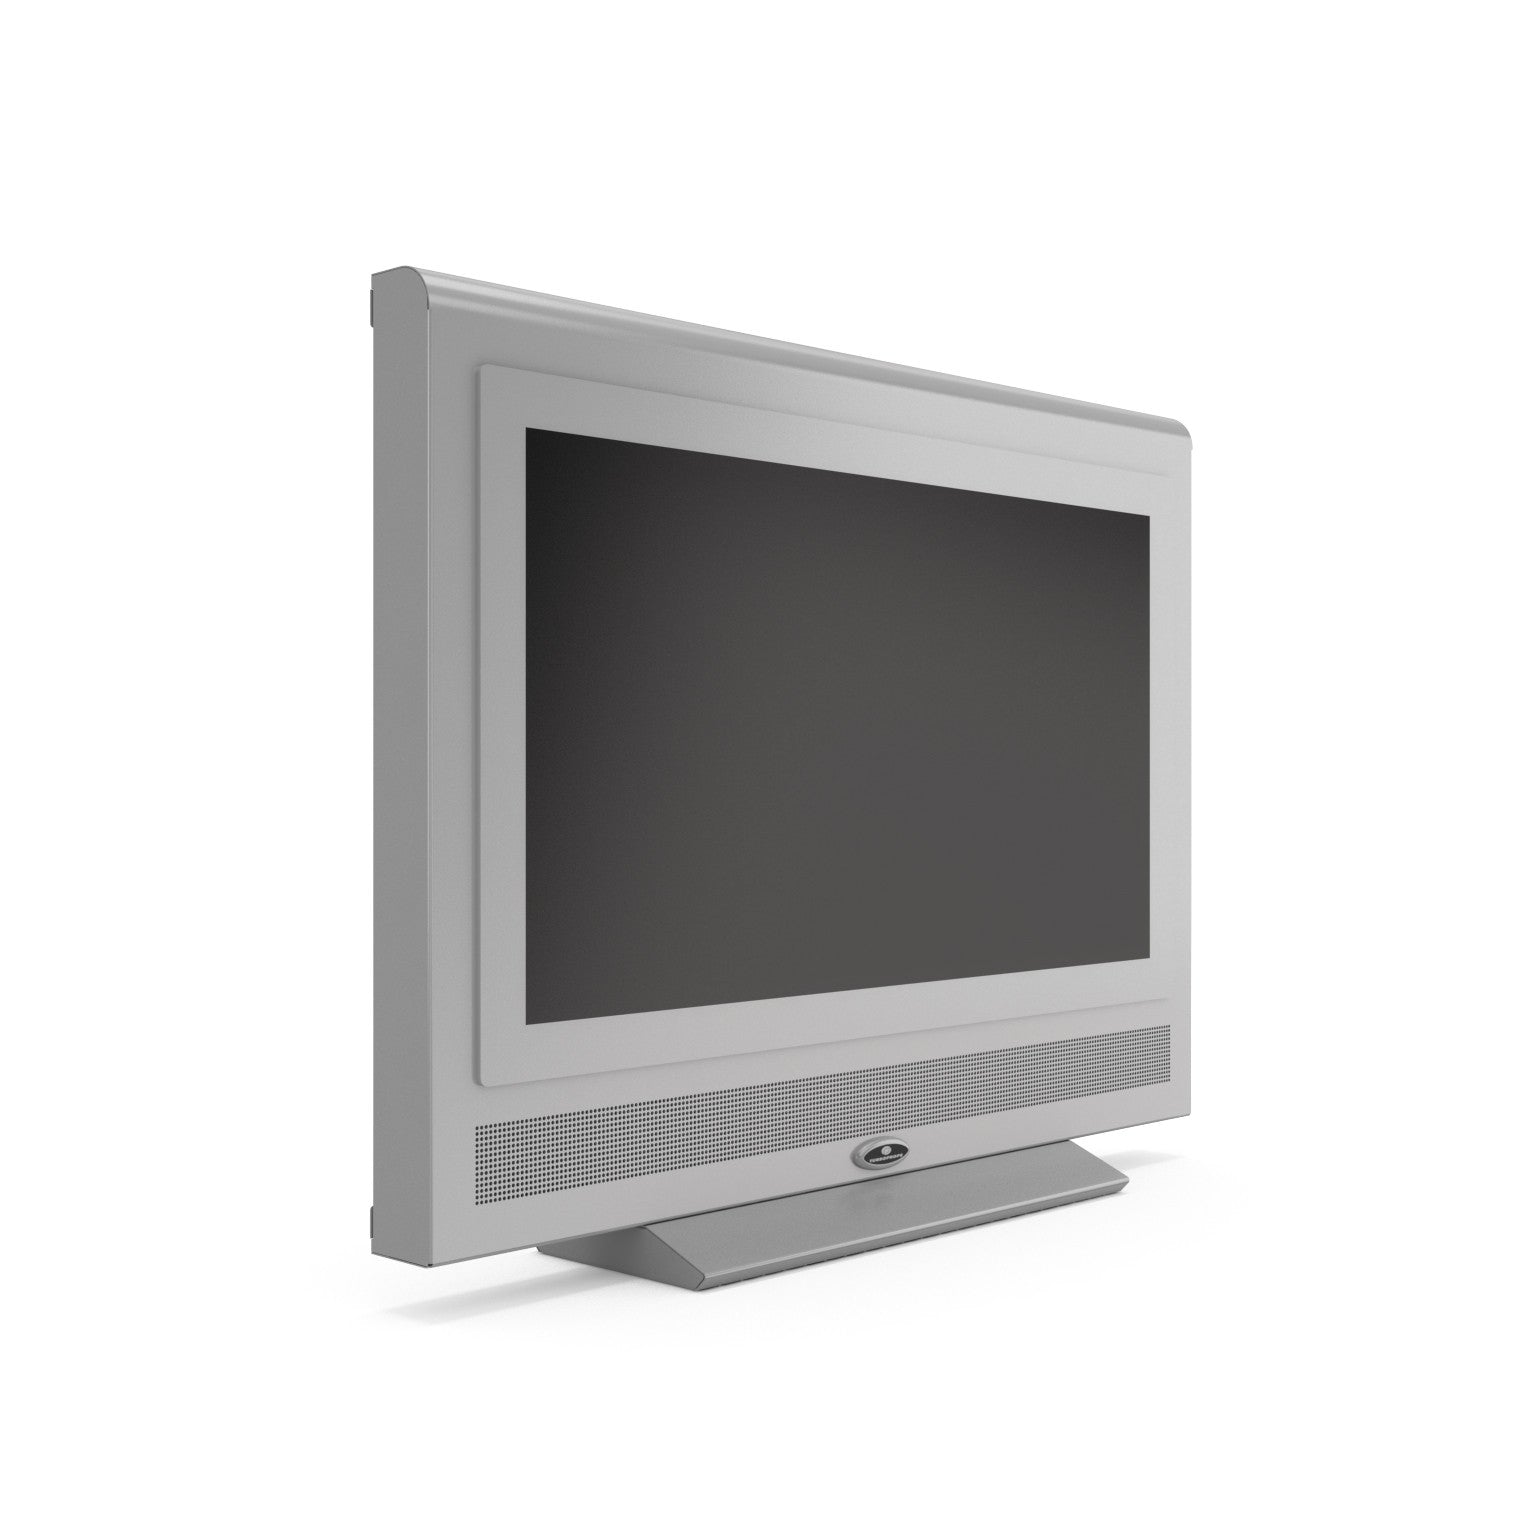 26 inch platinum LCD monitor prop